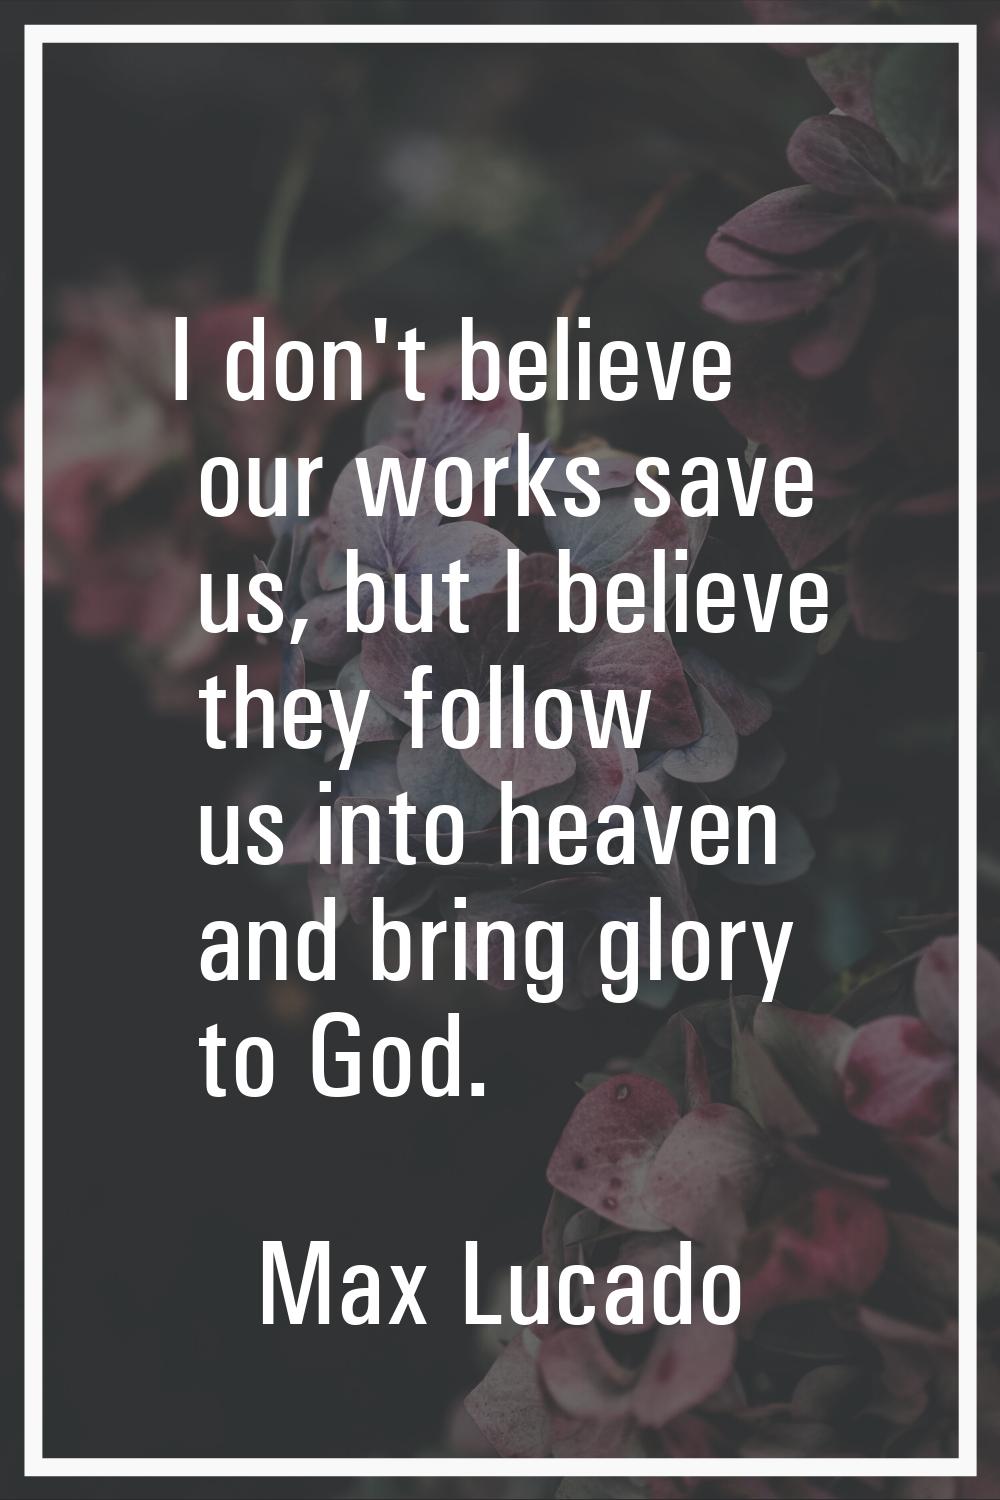 I don't believe our works save us, but I believe they follow us into heaven and bring glory to God.